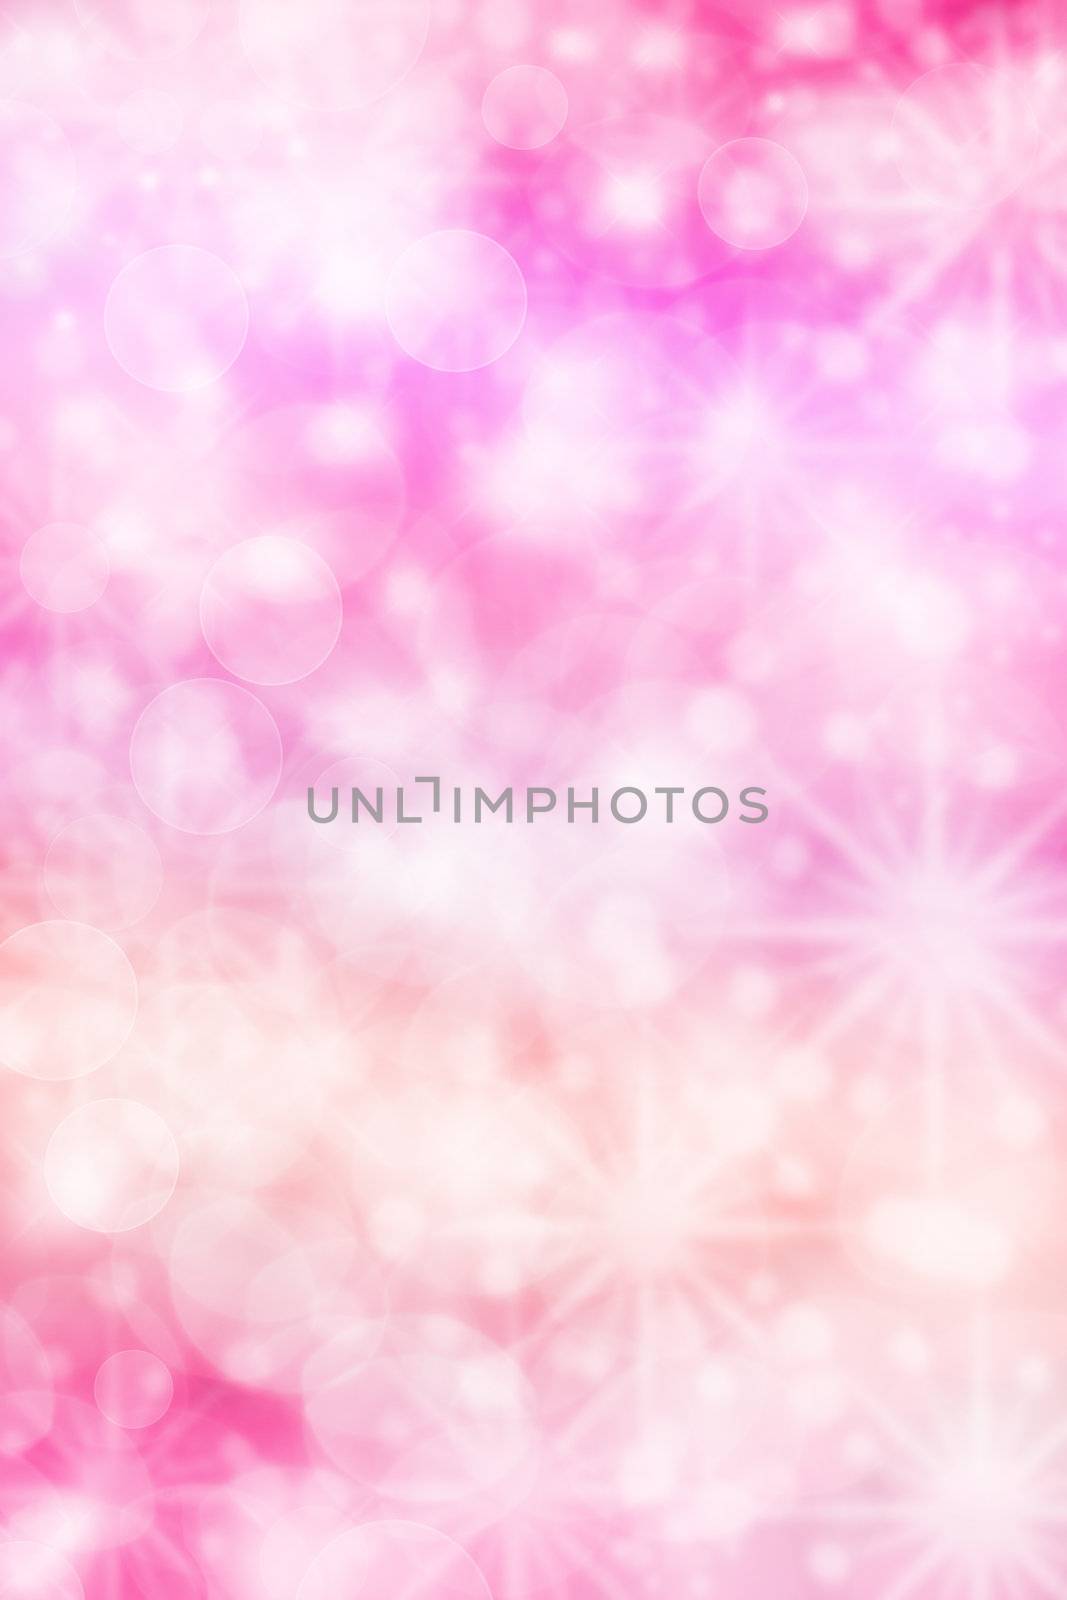 Abstract lights background in red and pink colors